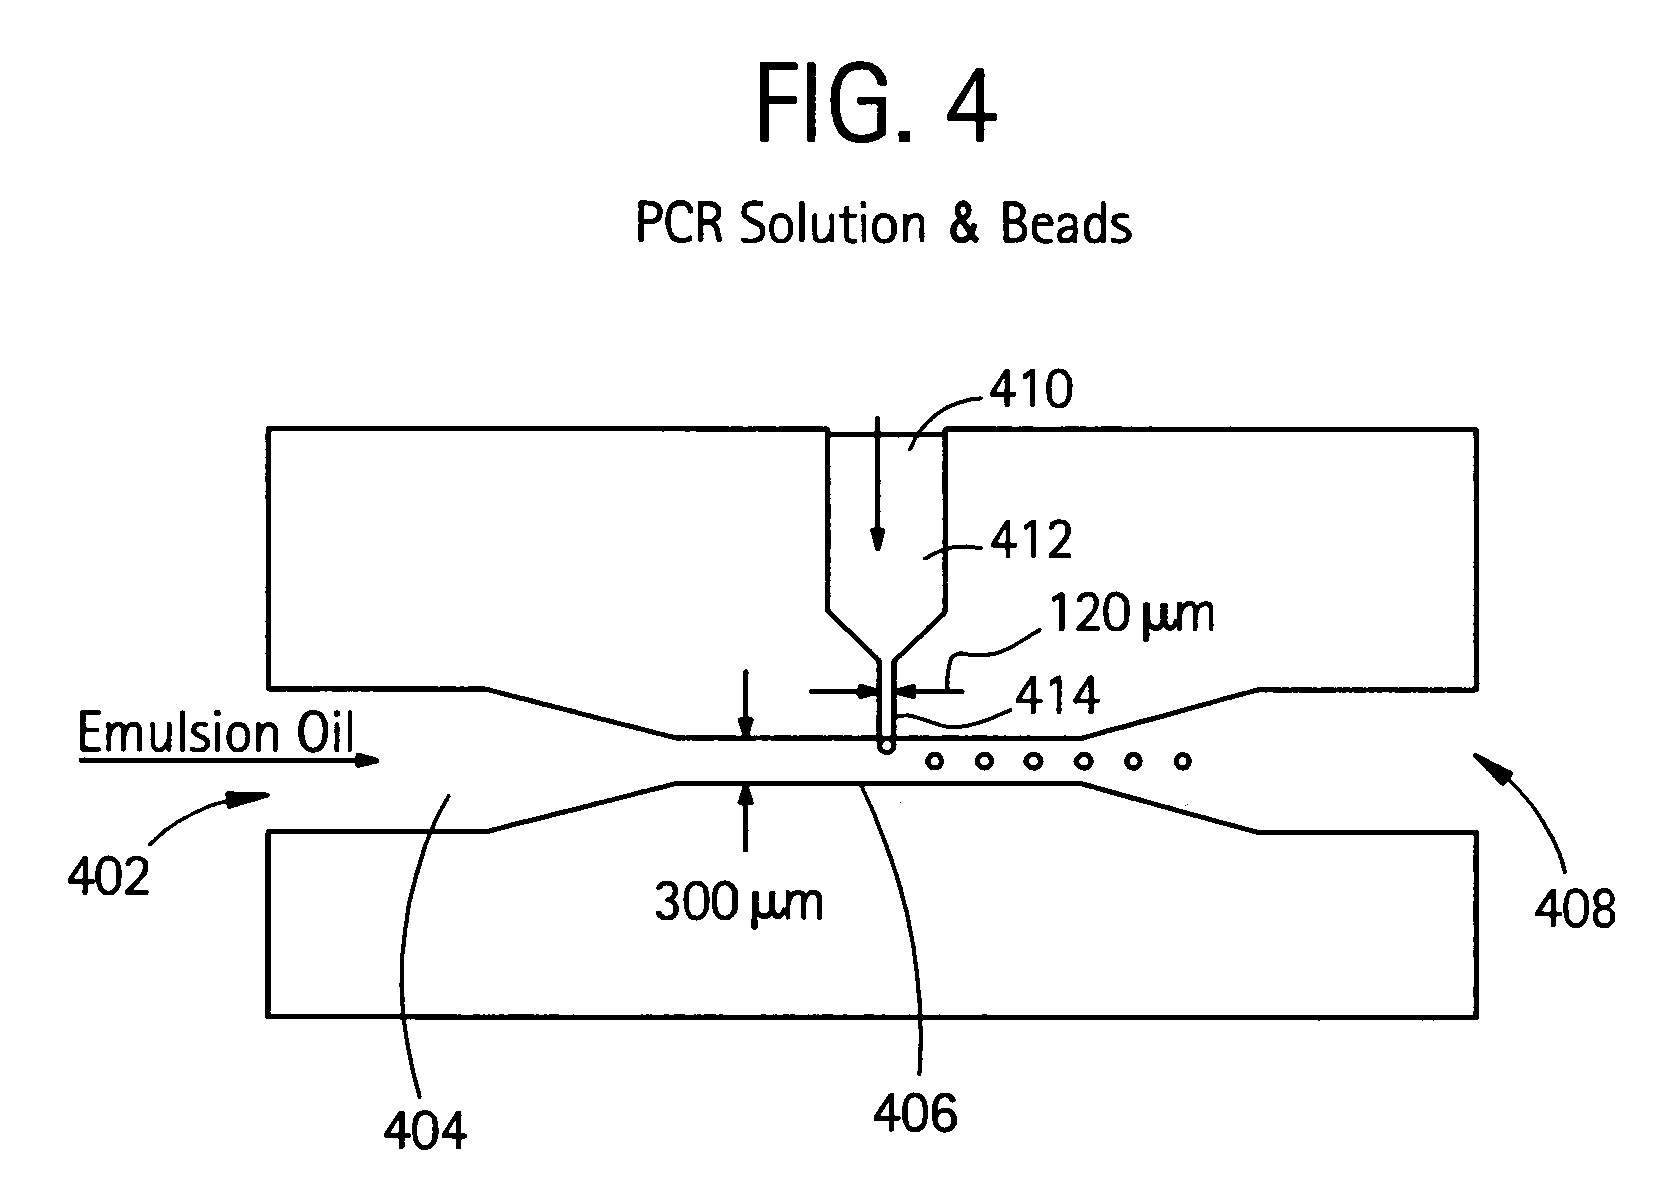 Nucleic acid amplification with continuous flow emulsion